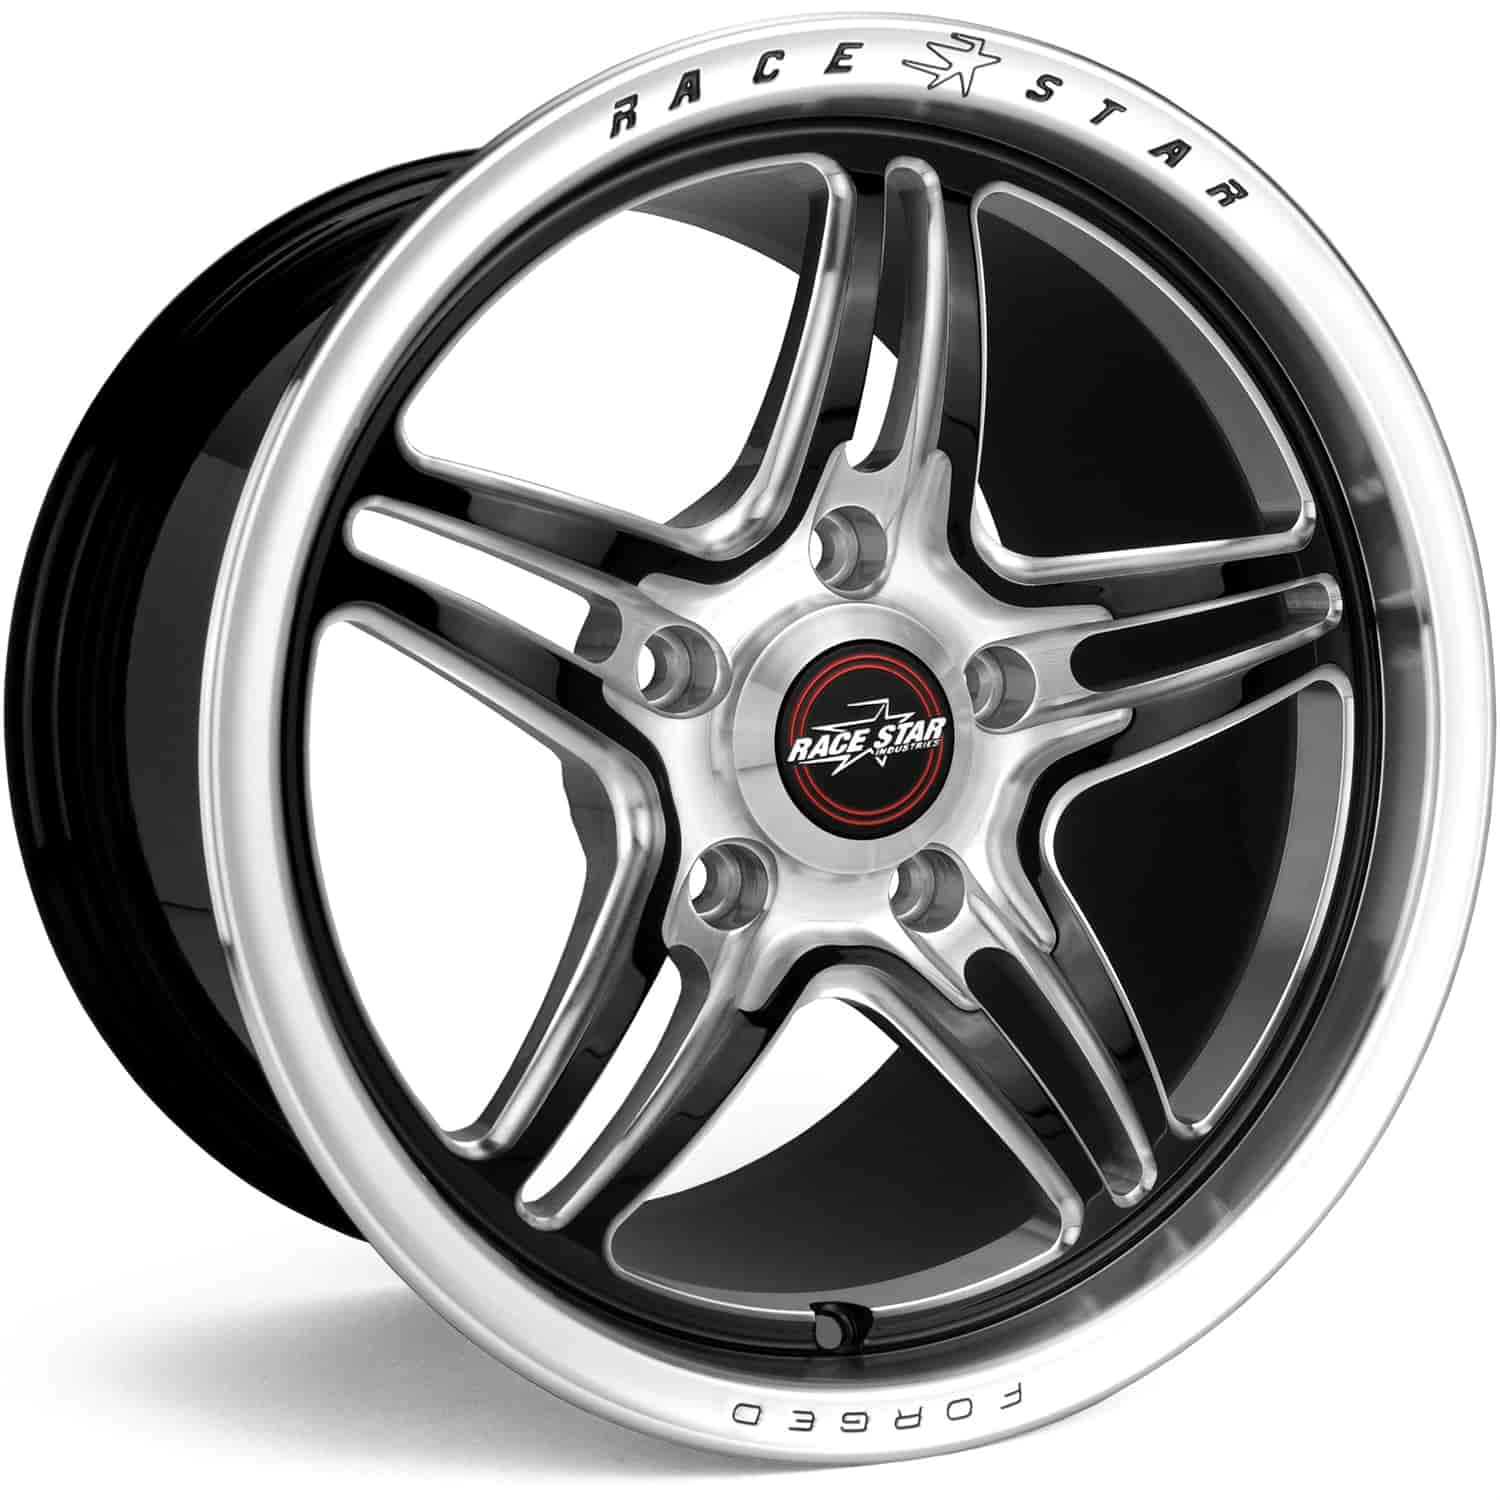 RSF-1 Forged Wheel Size: 17" x 10"